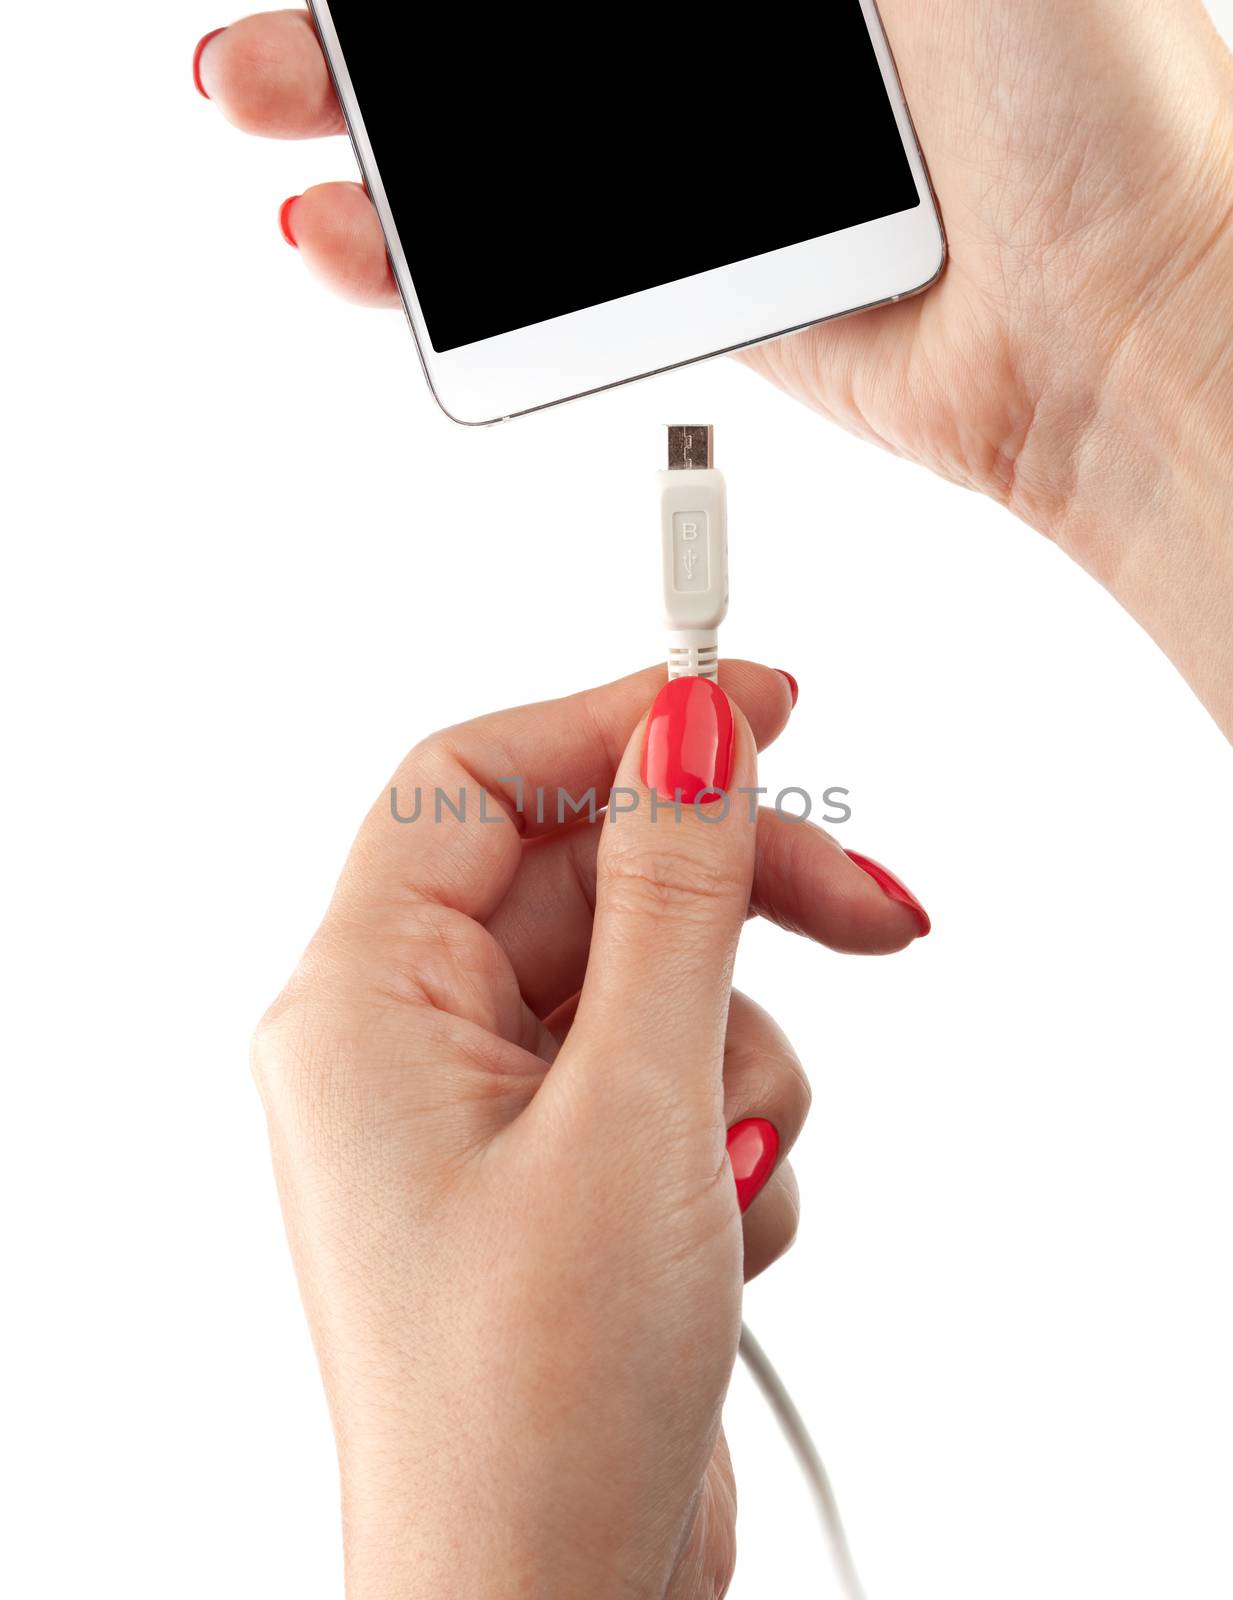 Smartphone in the hand of a woman. Connect the USB cable charger. Isolated on white background